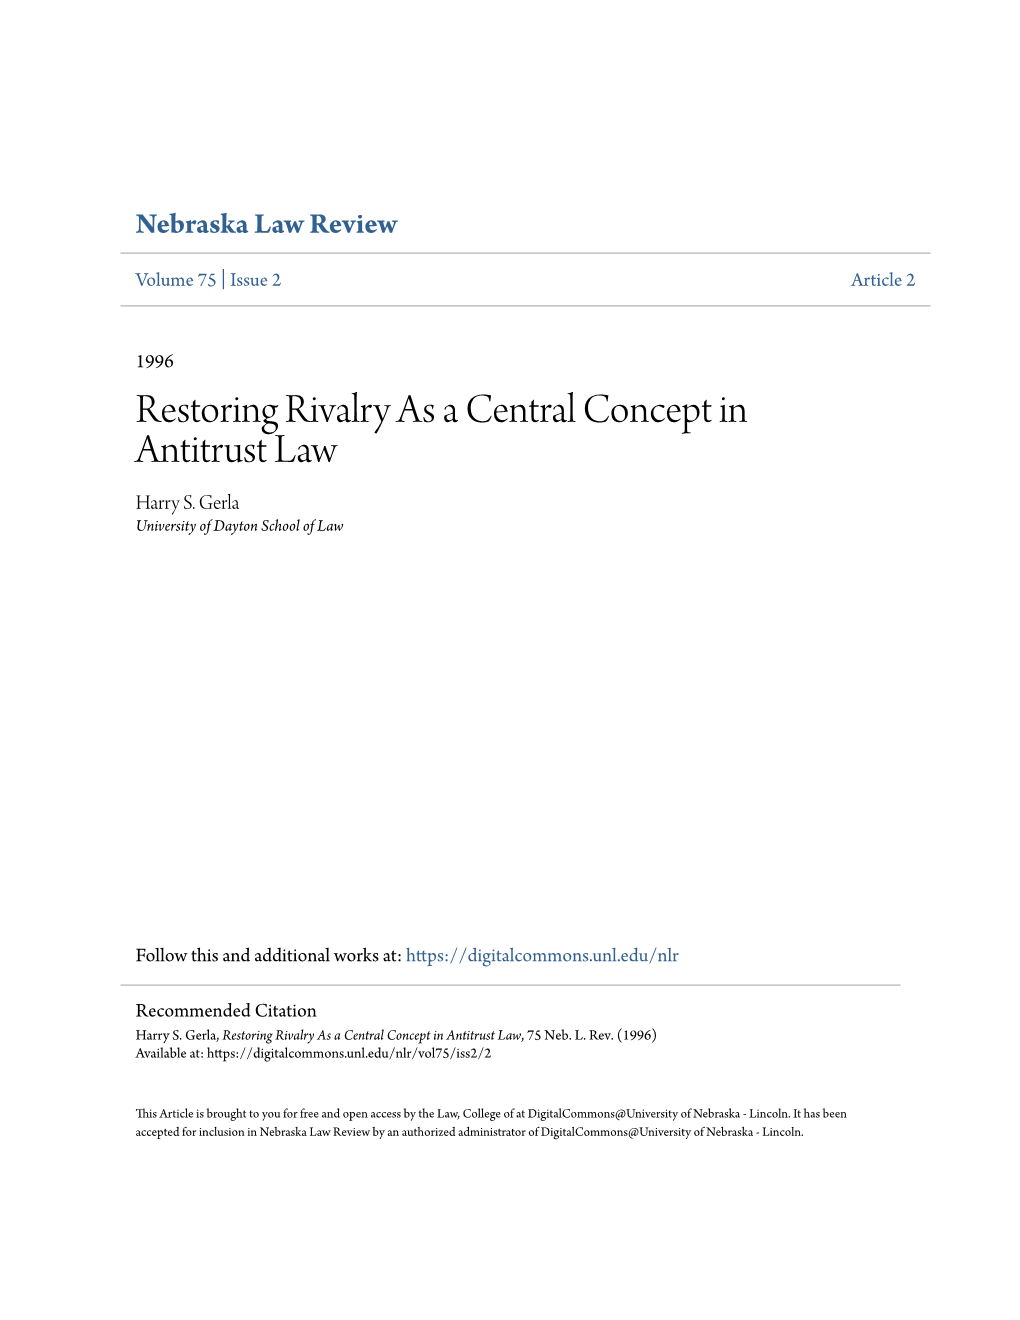 Restoring Rivalry As a Central Concept in Antitrust Law Harry S